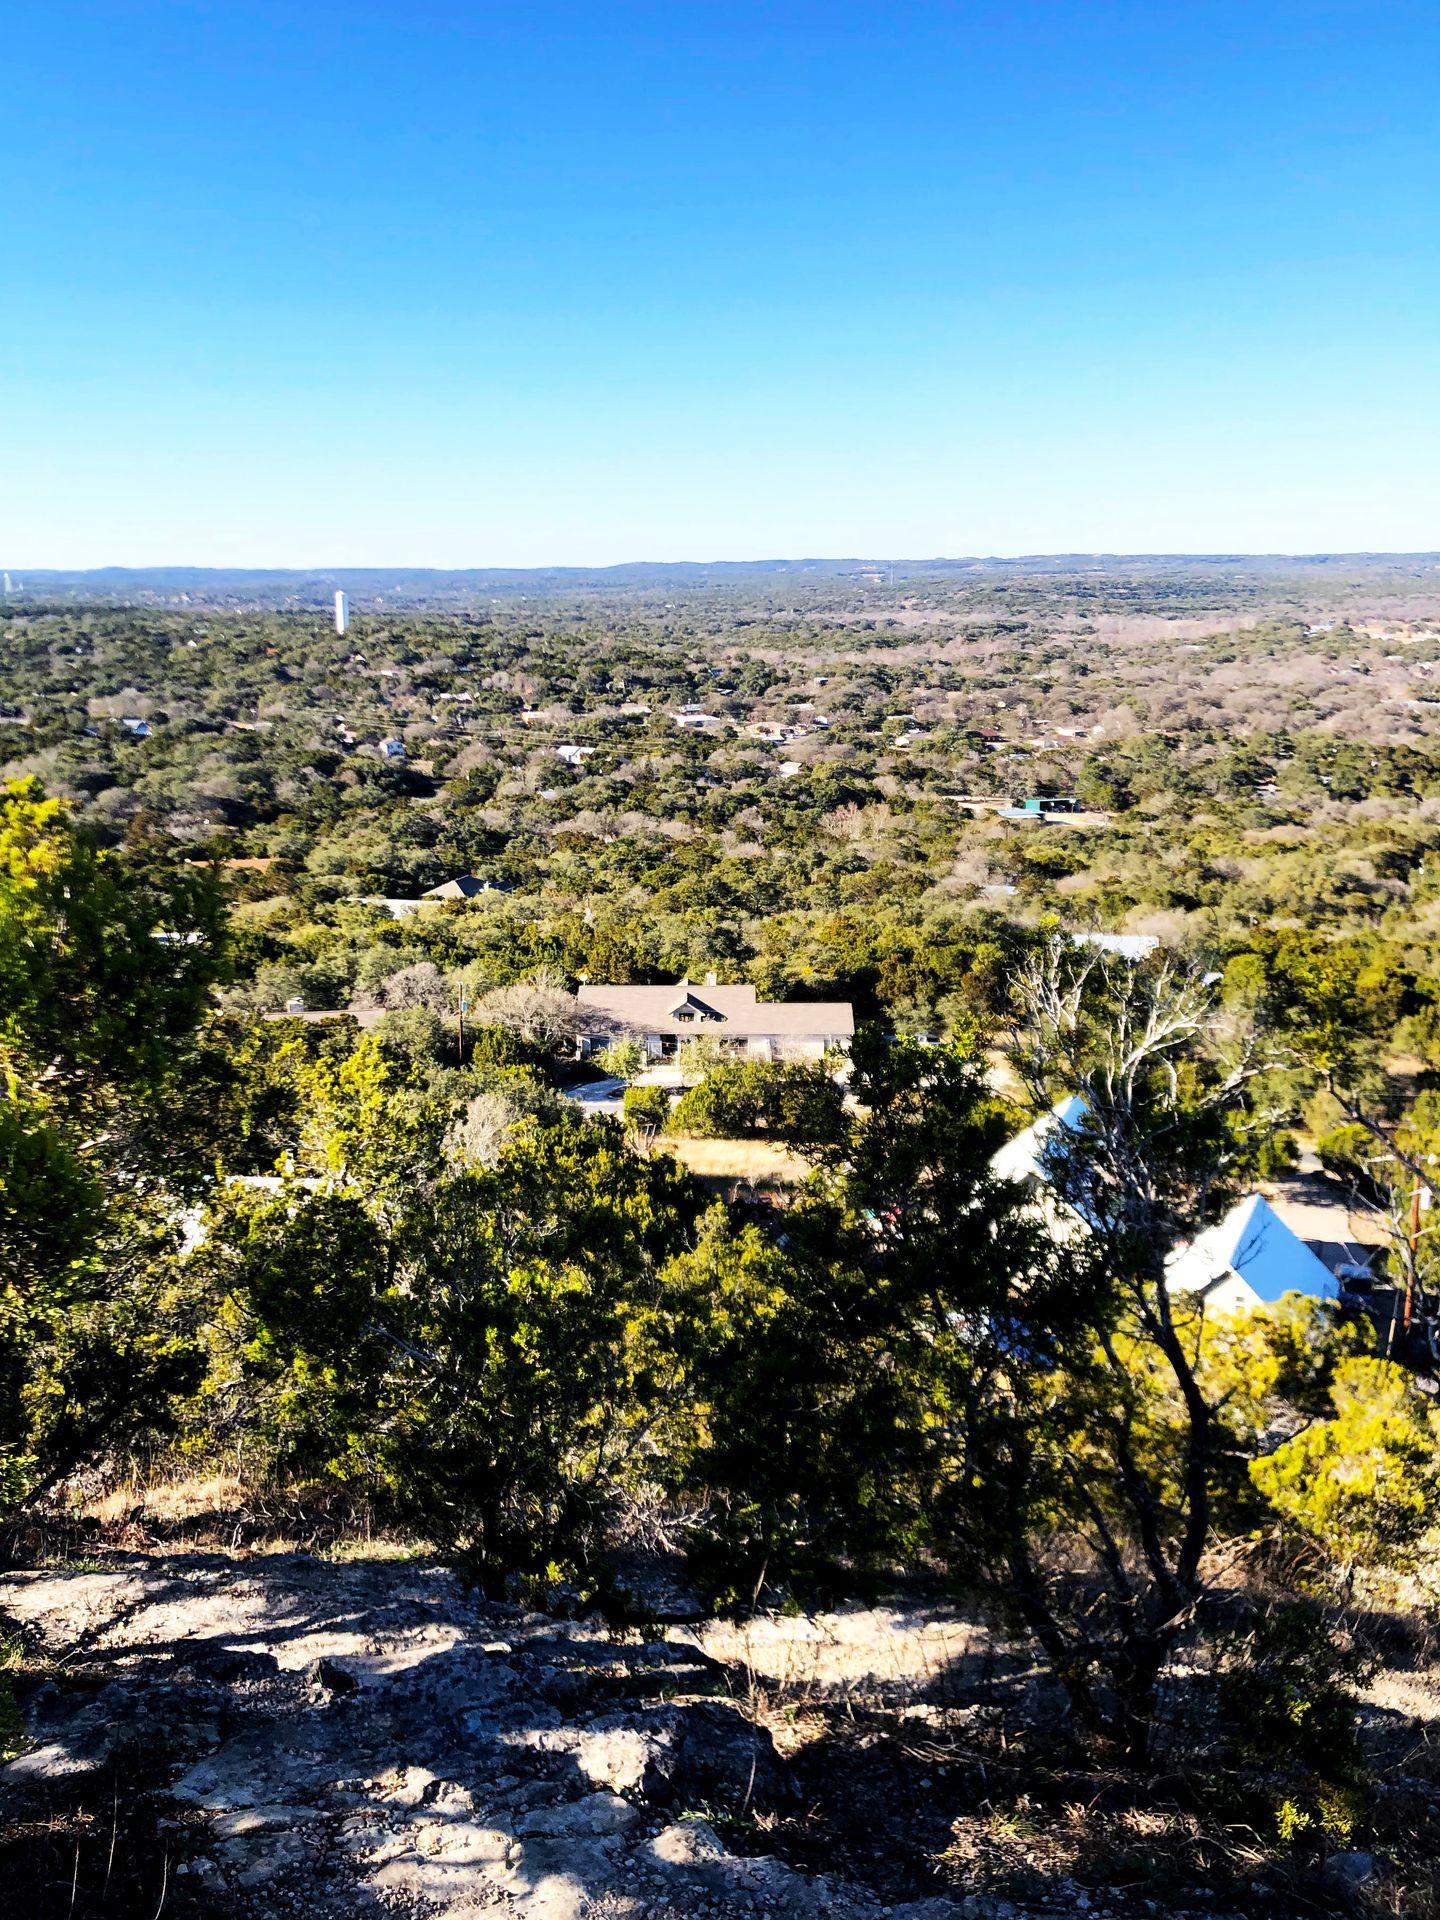 The view of Wimberley from Old Baldy. You can see a lot of trees and some houses.